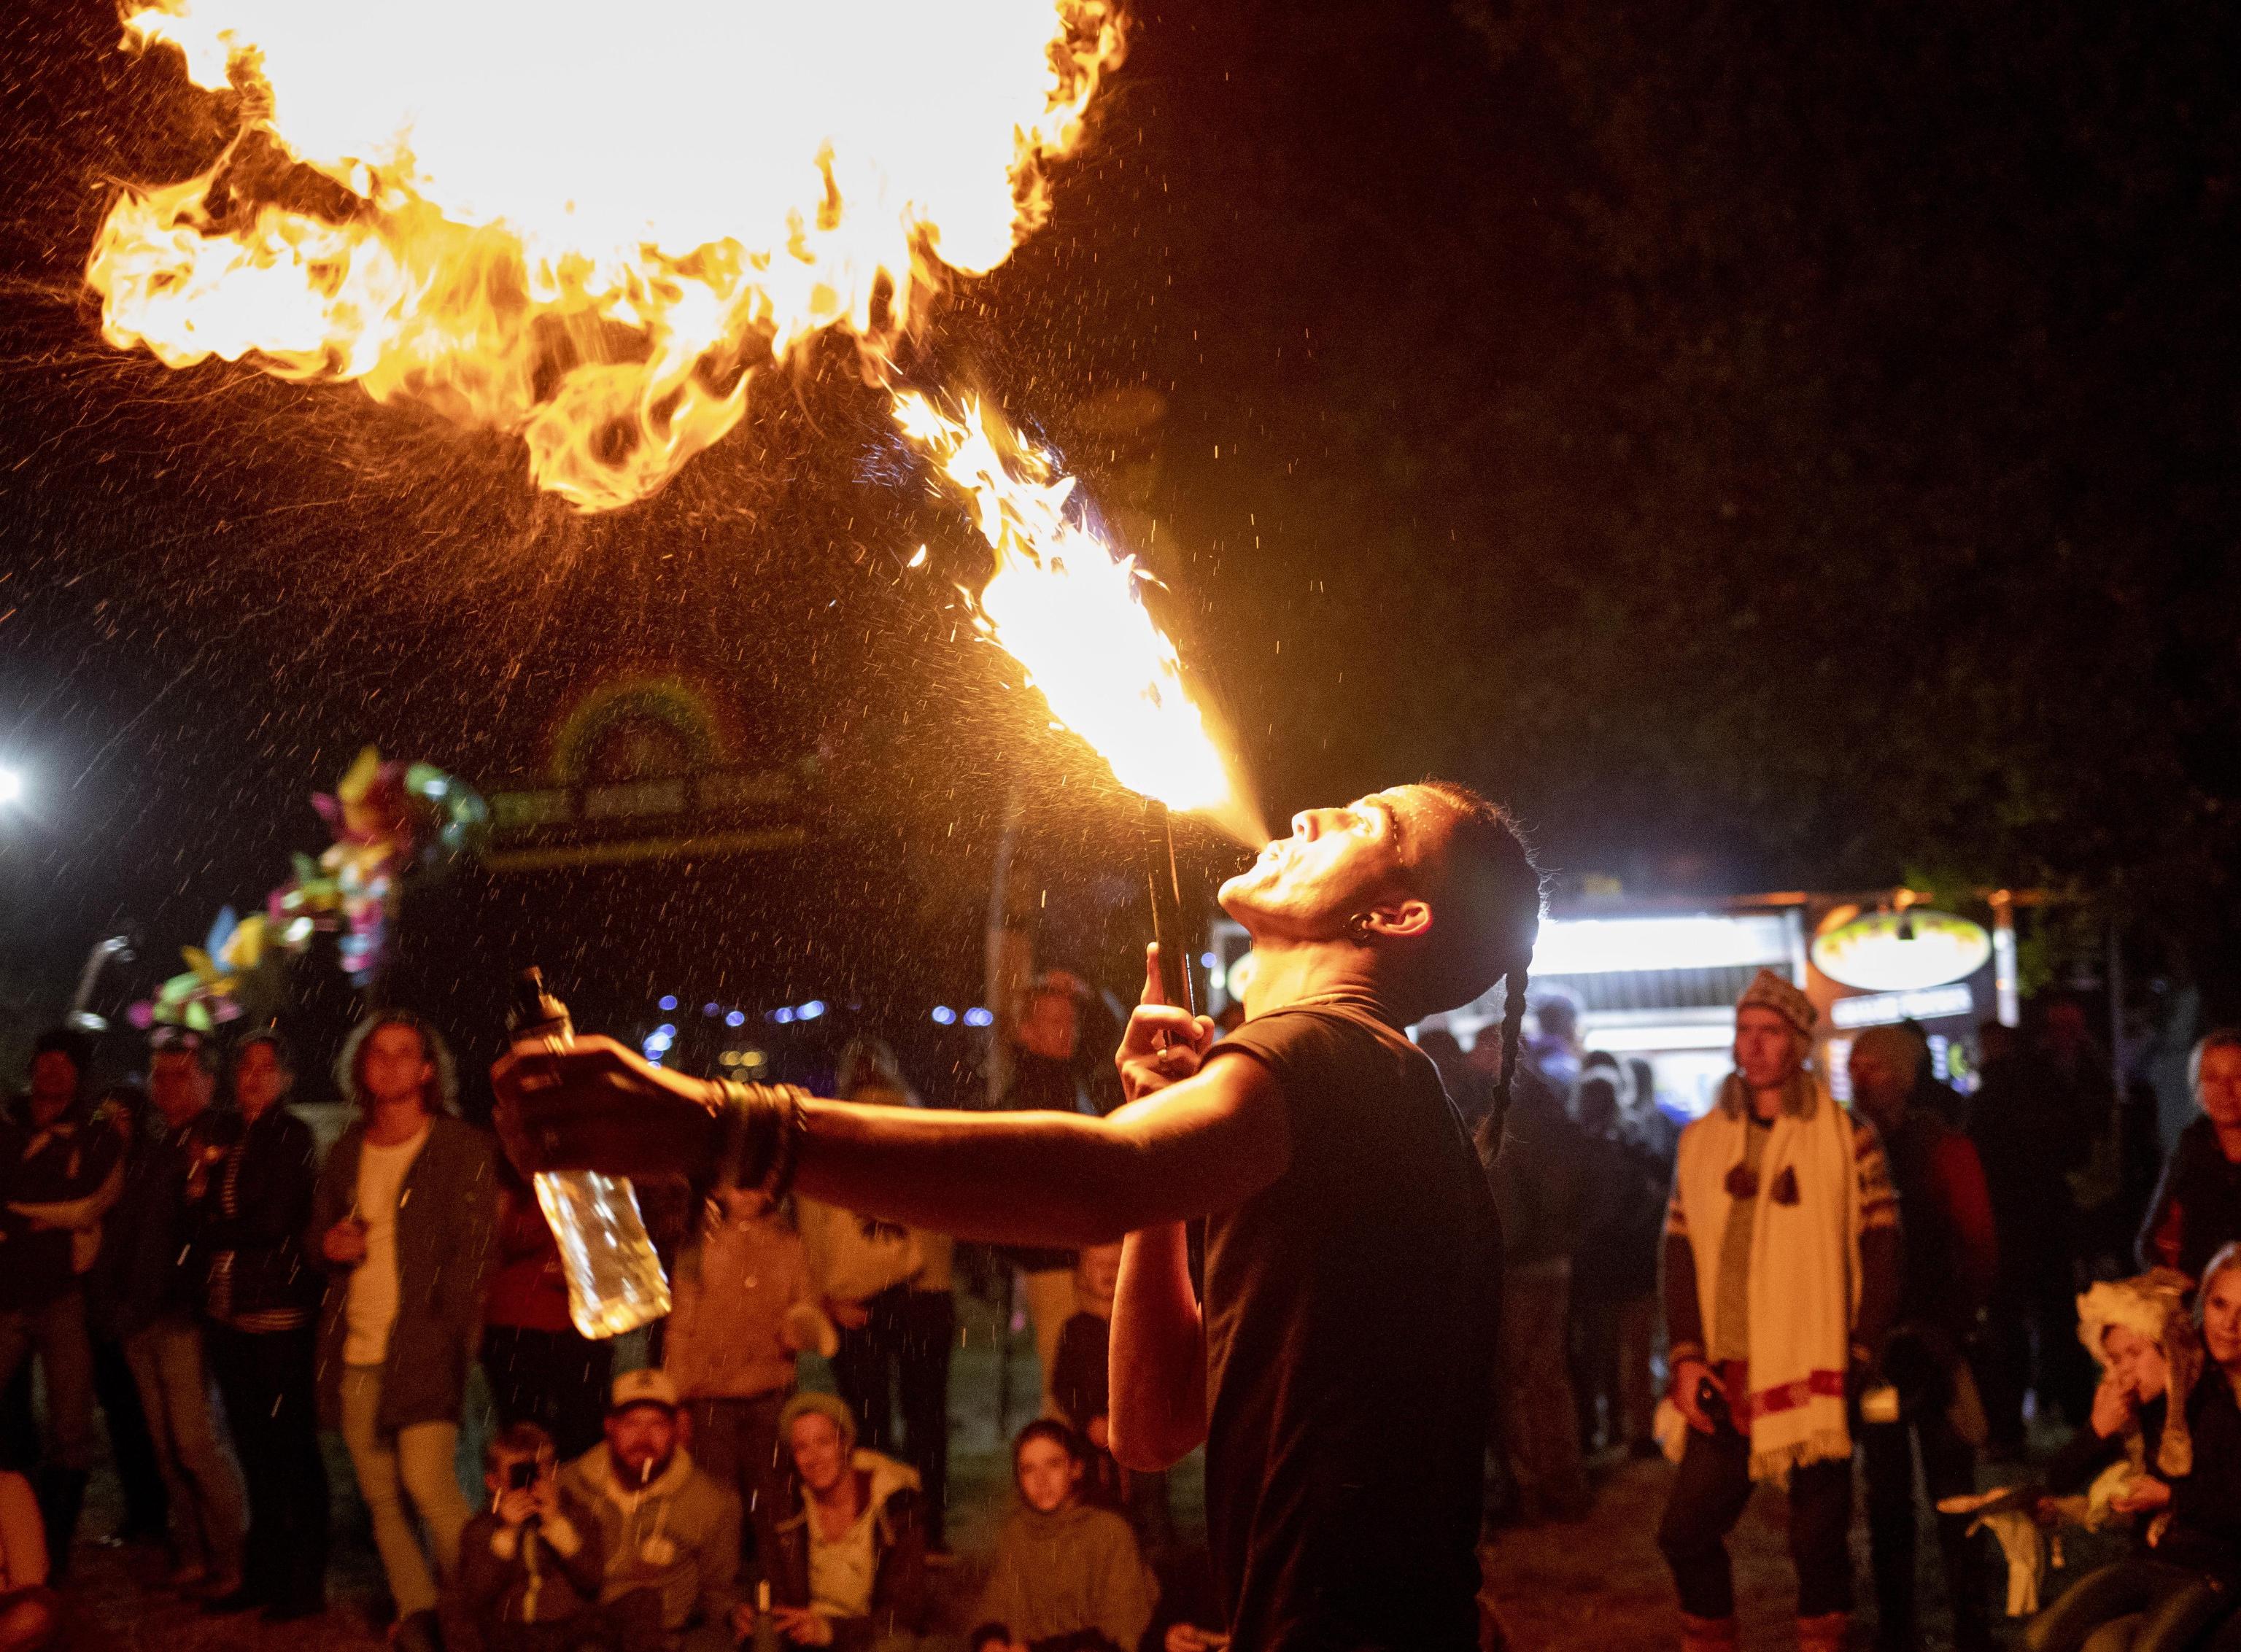 epa07517001 A fire poi artist blows flames from his mouth by lighting paraffin during the annual Splashy Fen music festival, Underberg, South Africa, 19 April 2019 (issued 20 April 2019). The five day long festival is the oldest in the country and is celebrating its 30 year. The festival has four stages with various music styles, morning yoga sessions, artworks, trail running, holistic lifestyle events, stalls etc.  EPA/KIM LUDBROOK